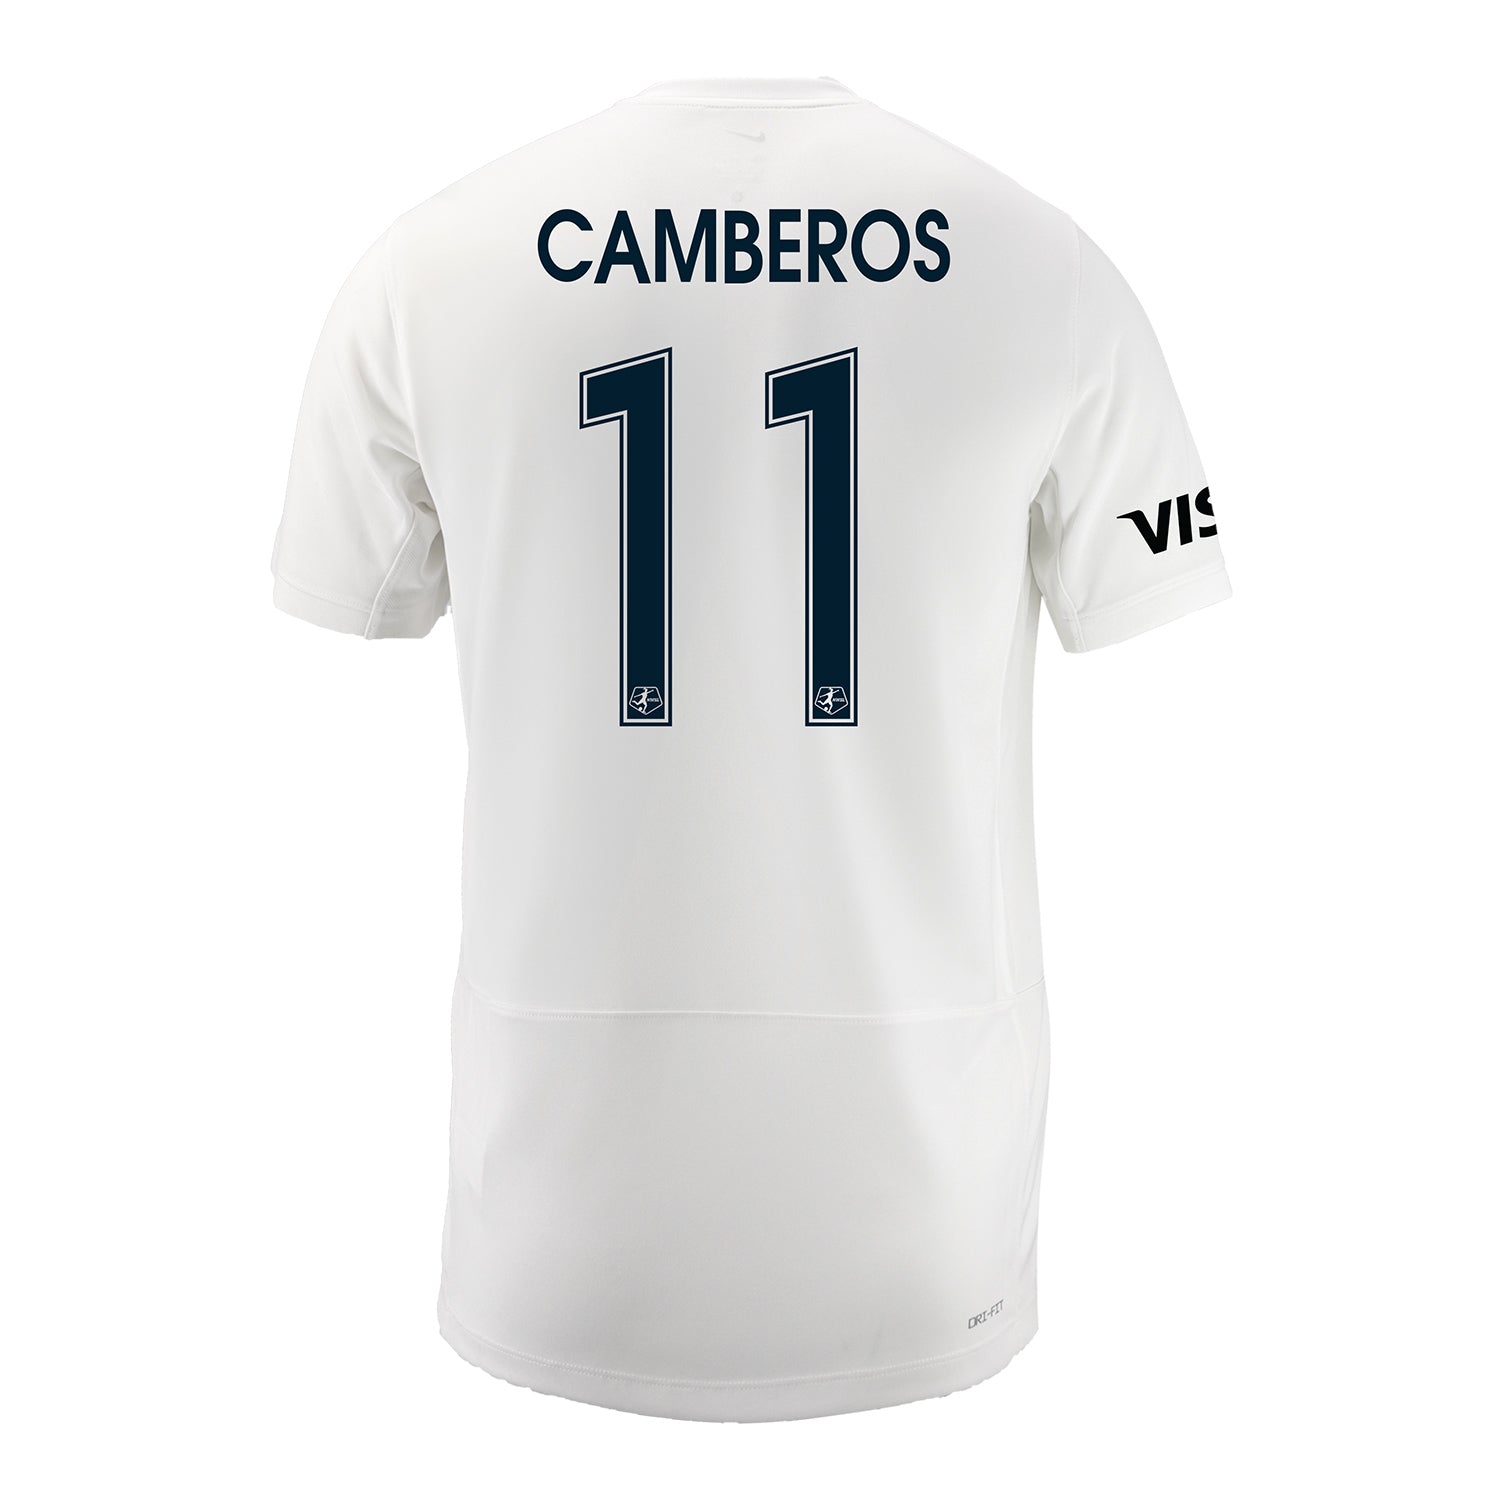 Youth Bay FC Scarlett Camberos Primary Jersey - Back View